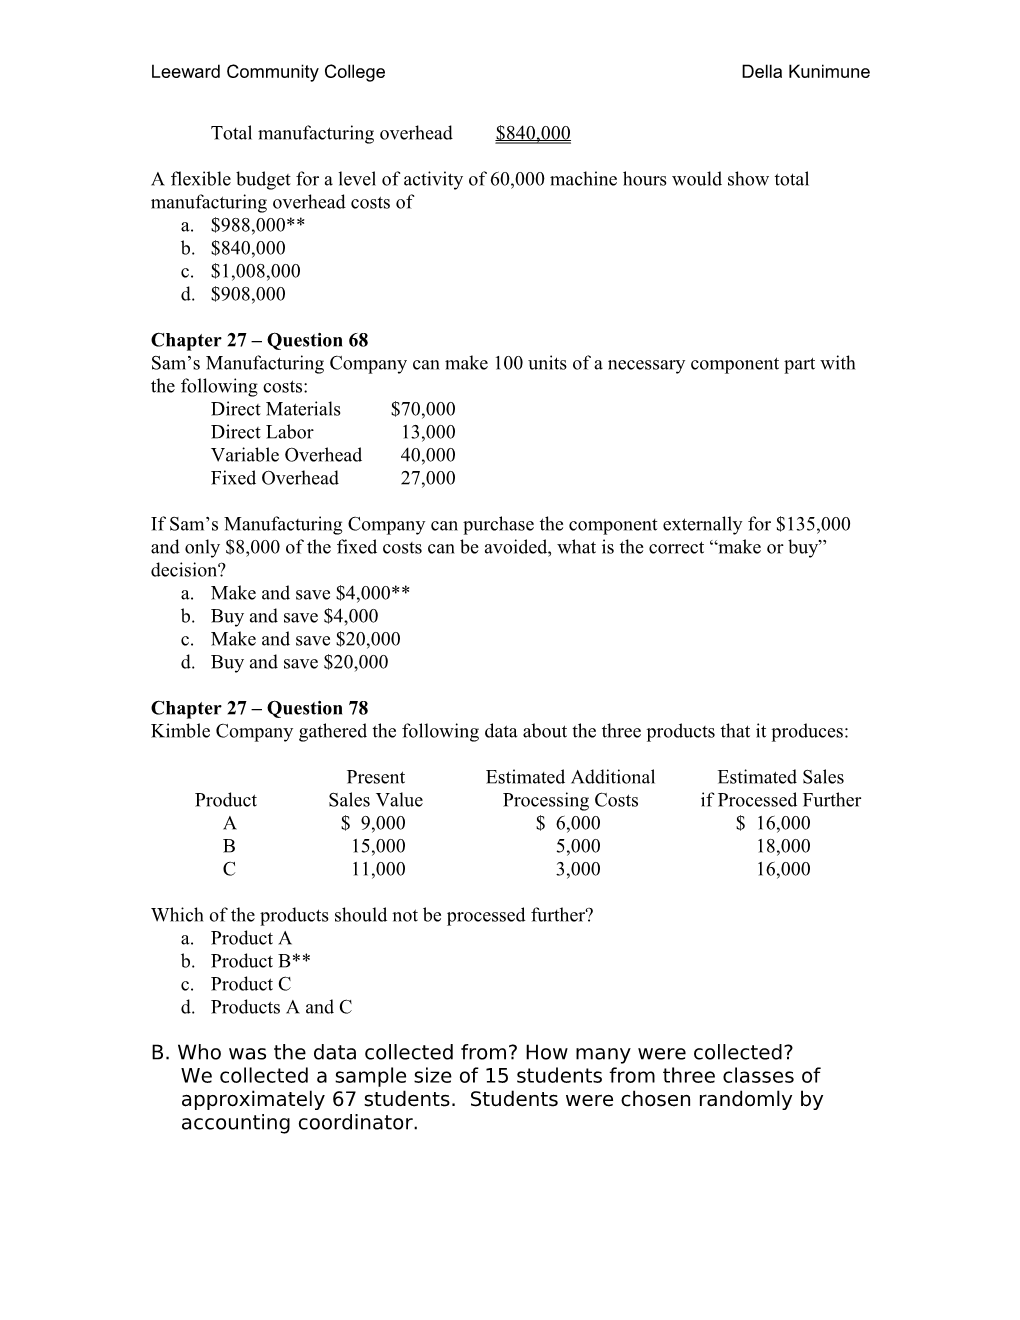 Student Learning Outcome (SLO) Assessment Template